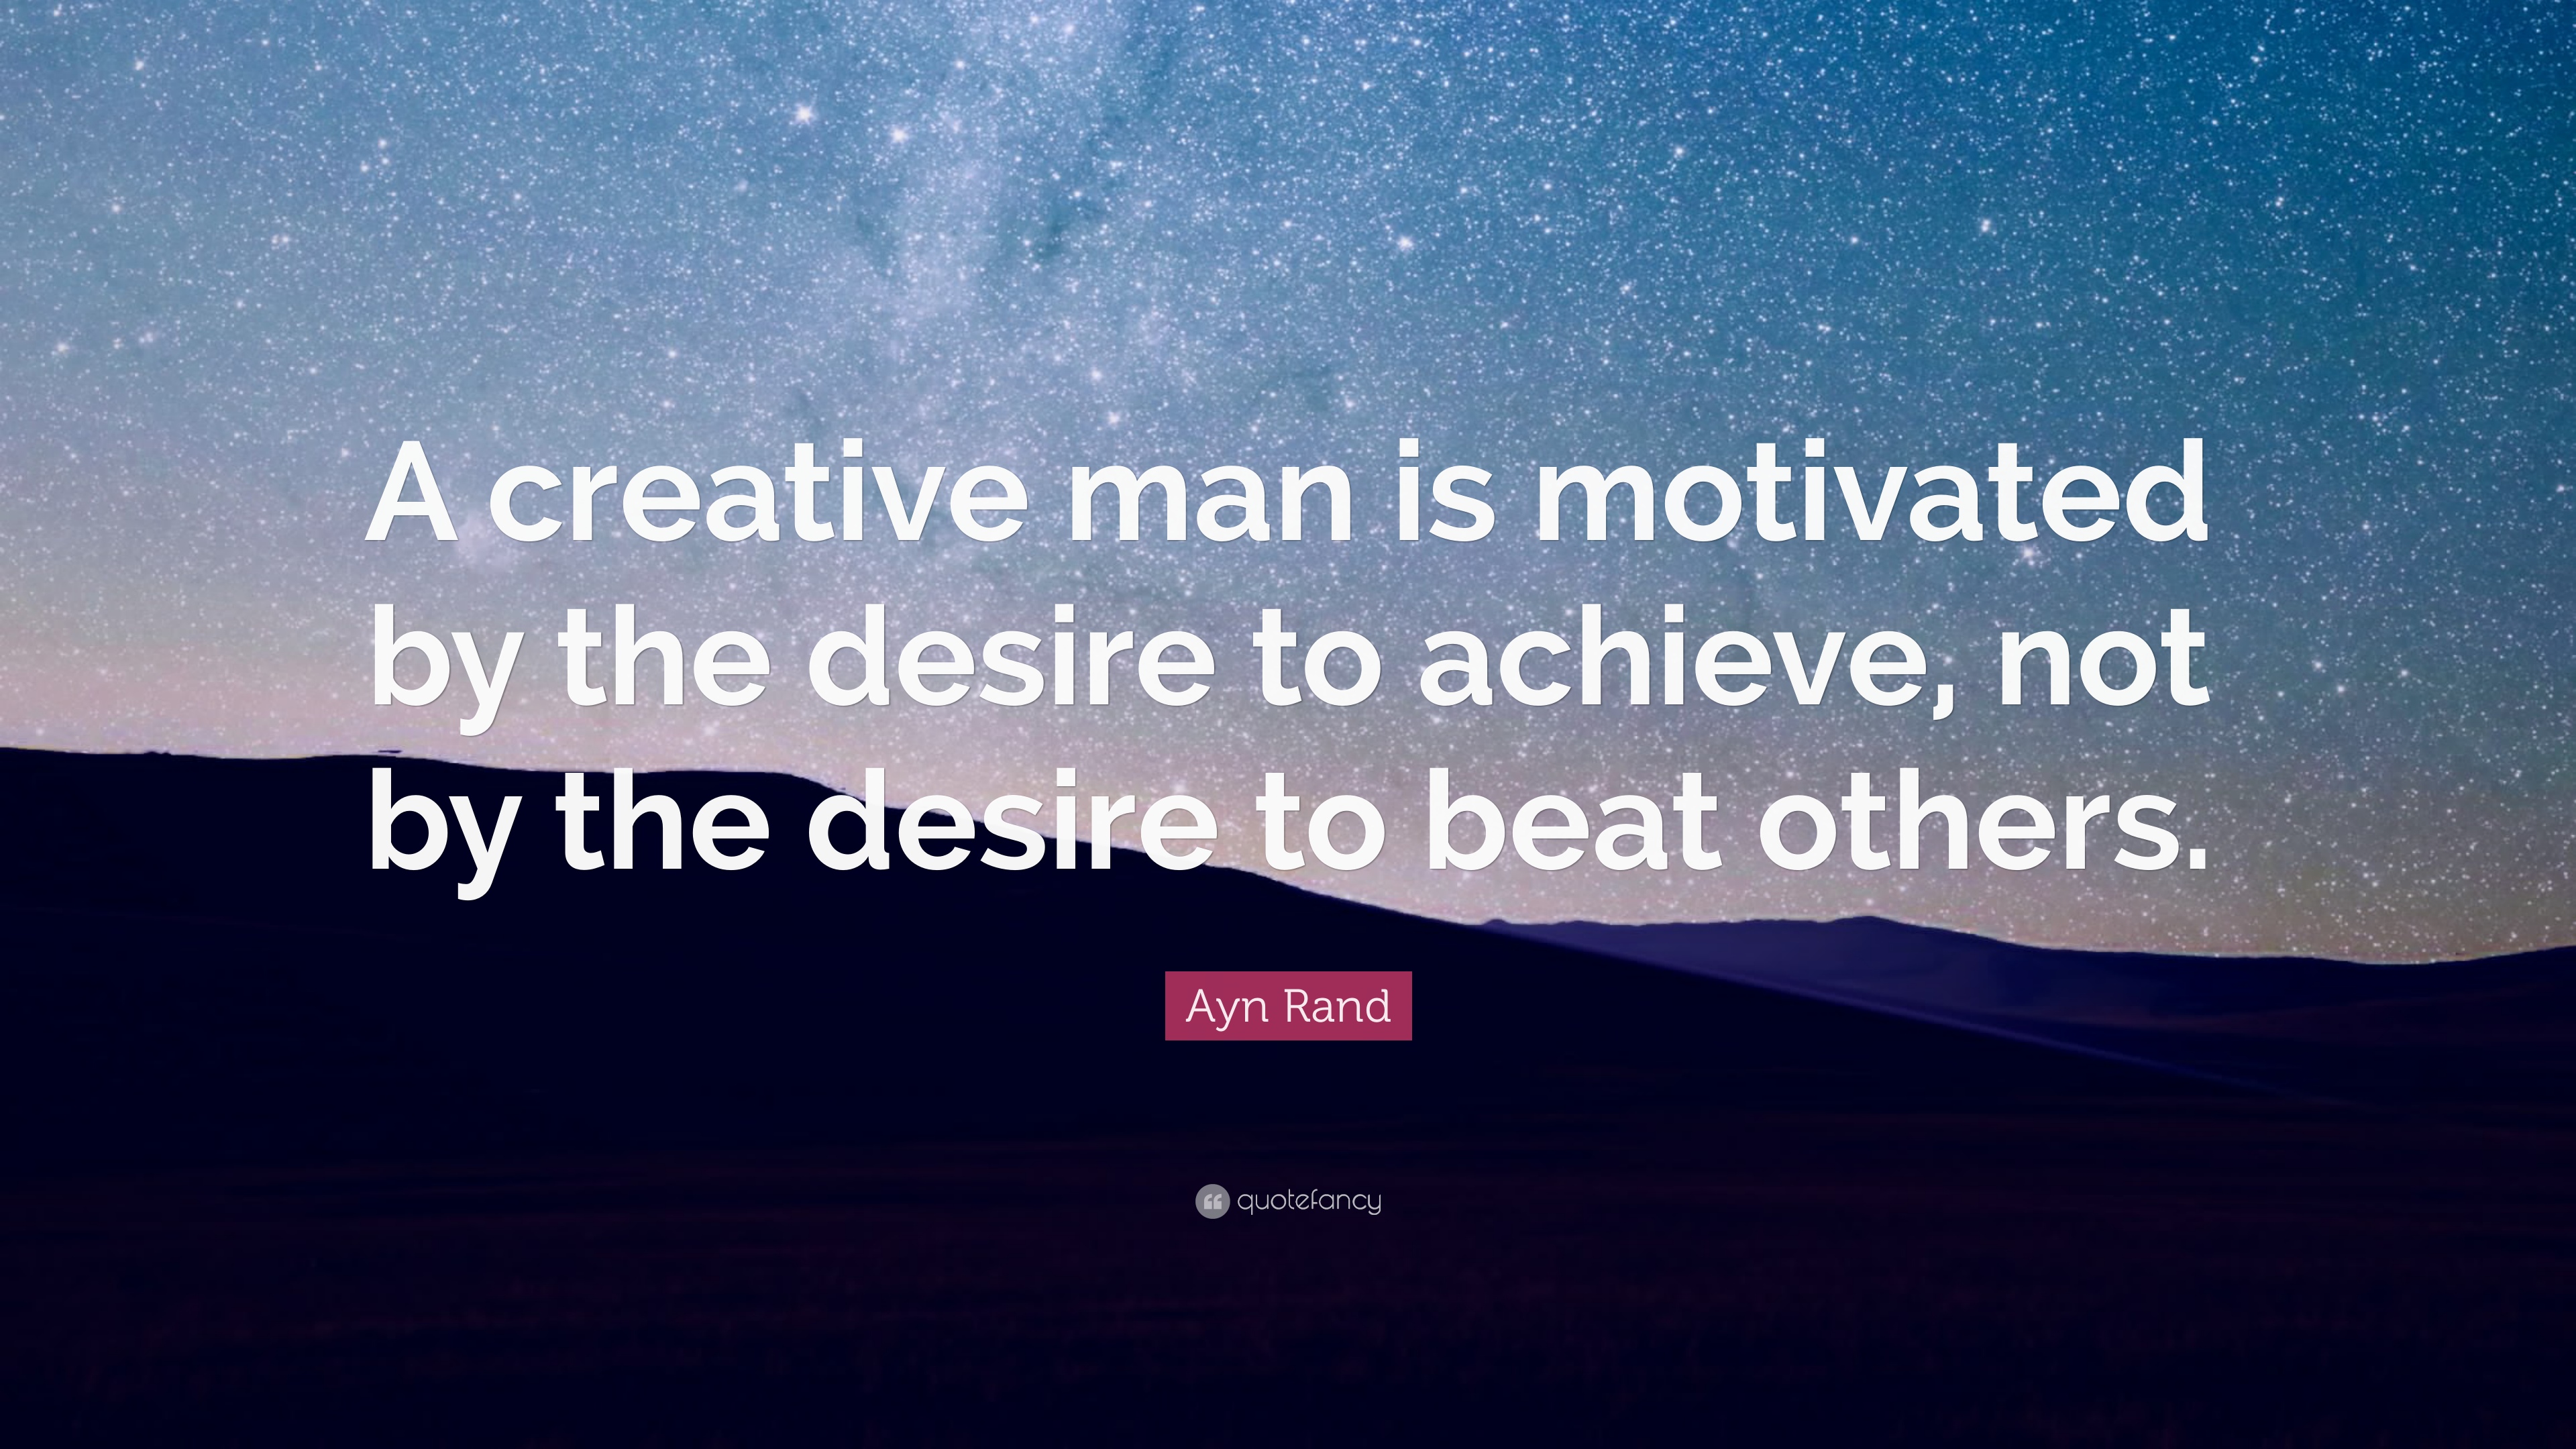 Ayn Rand Quote A creative man is motivated by the desire to